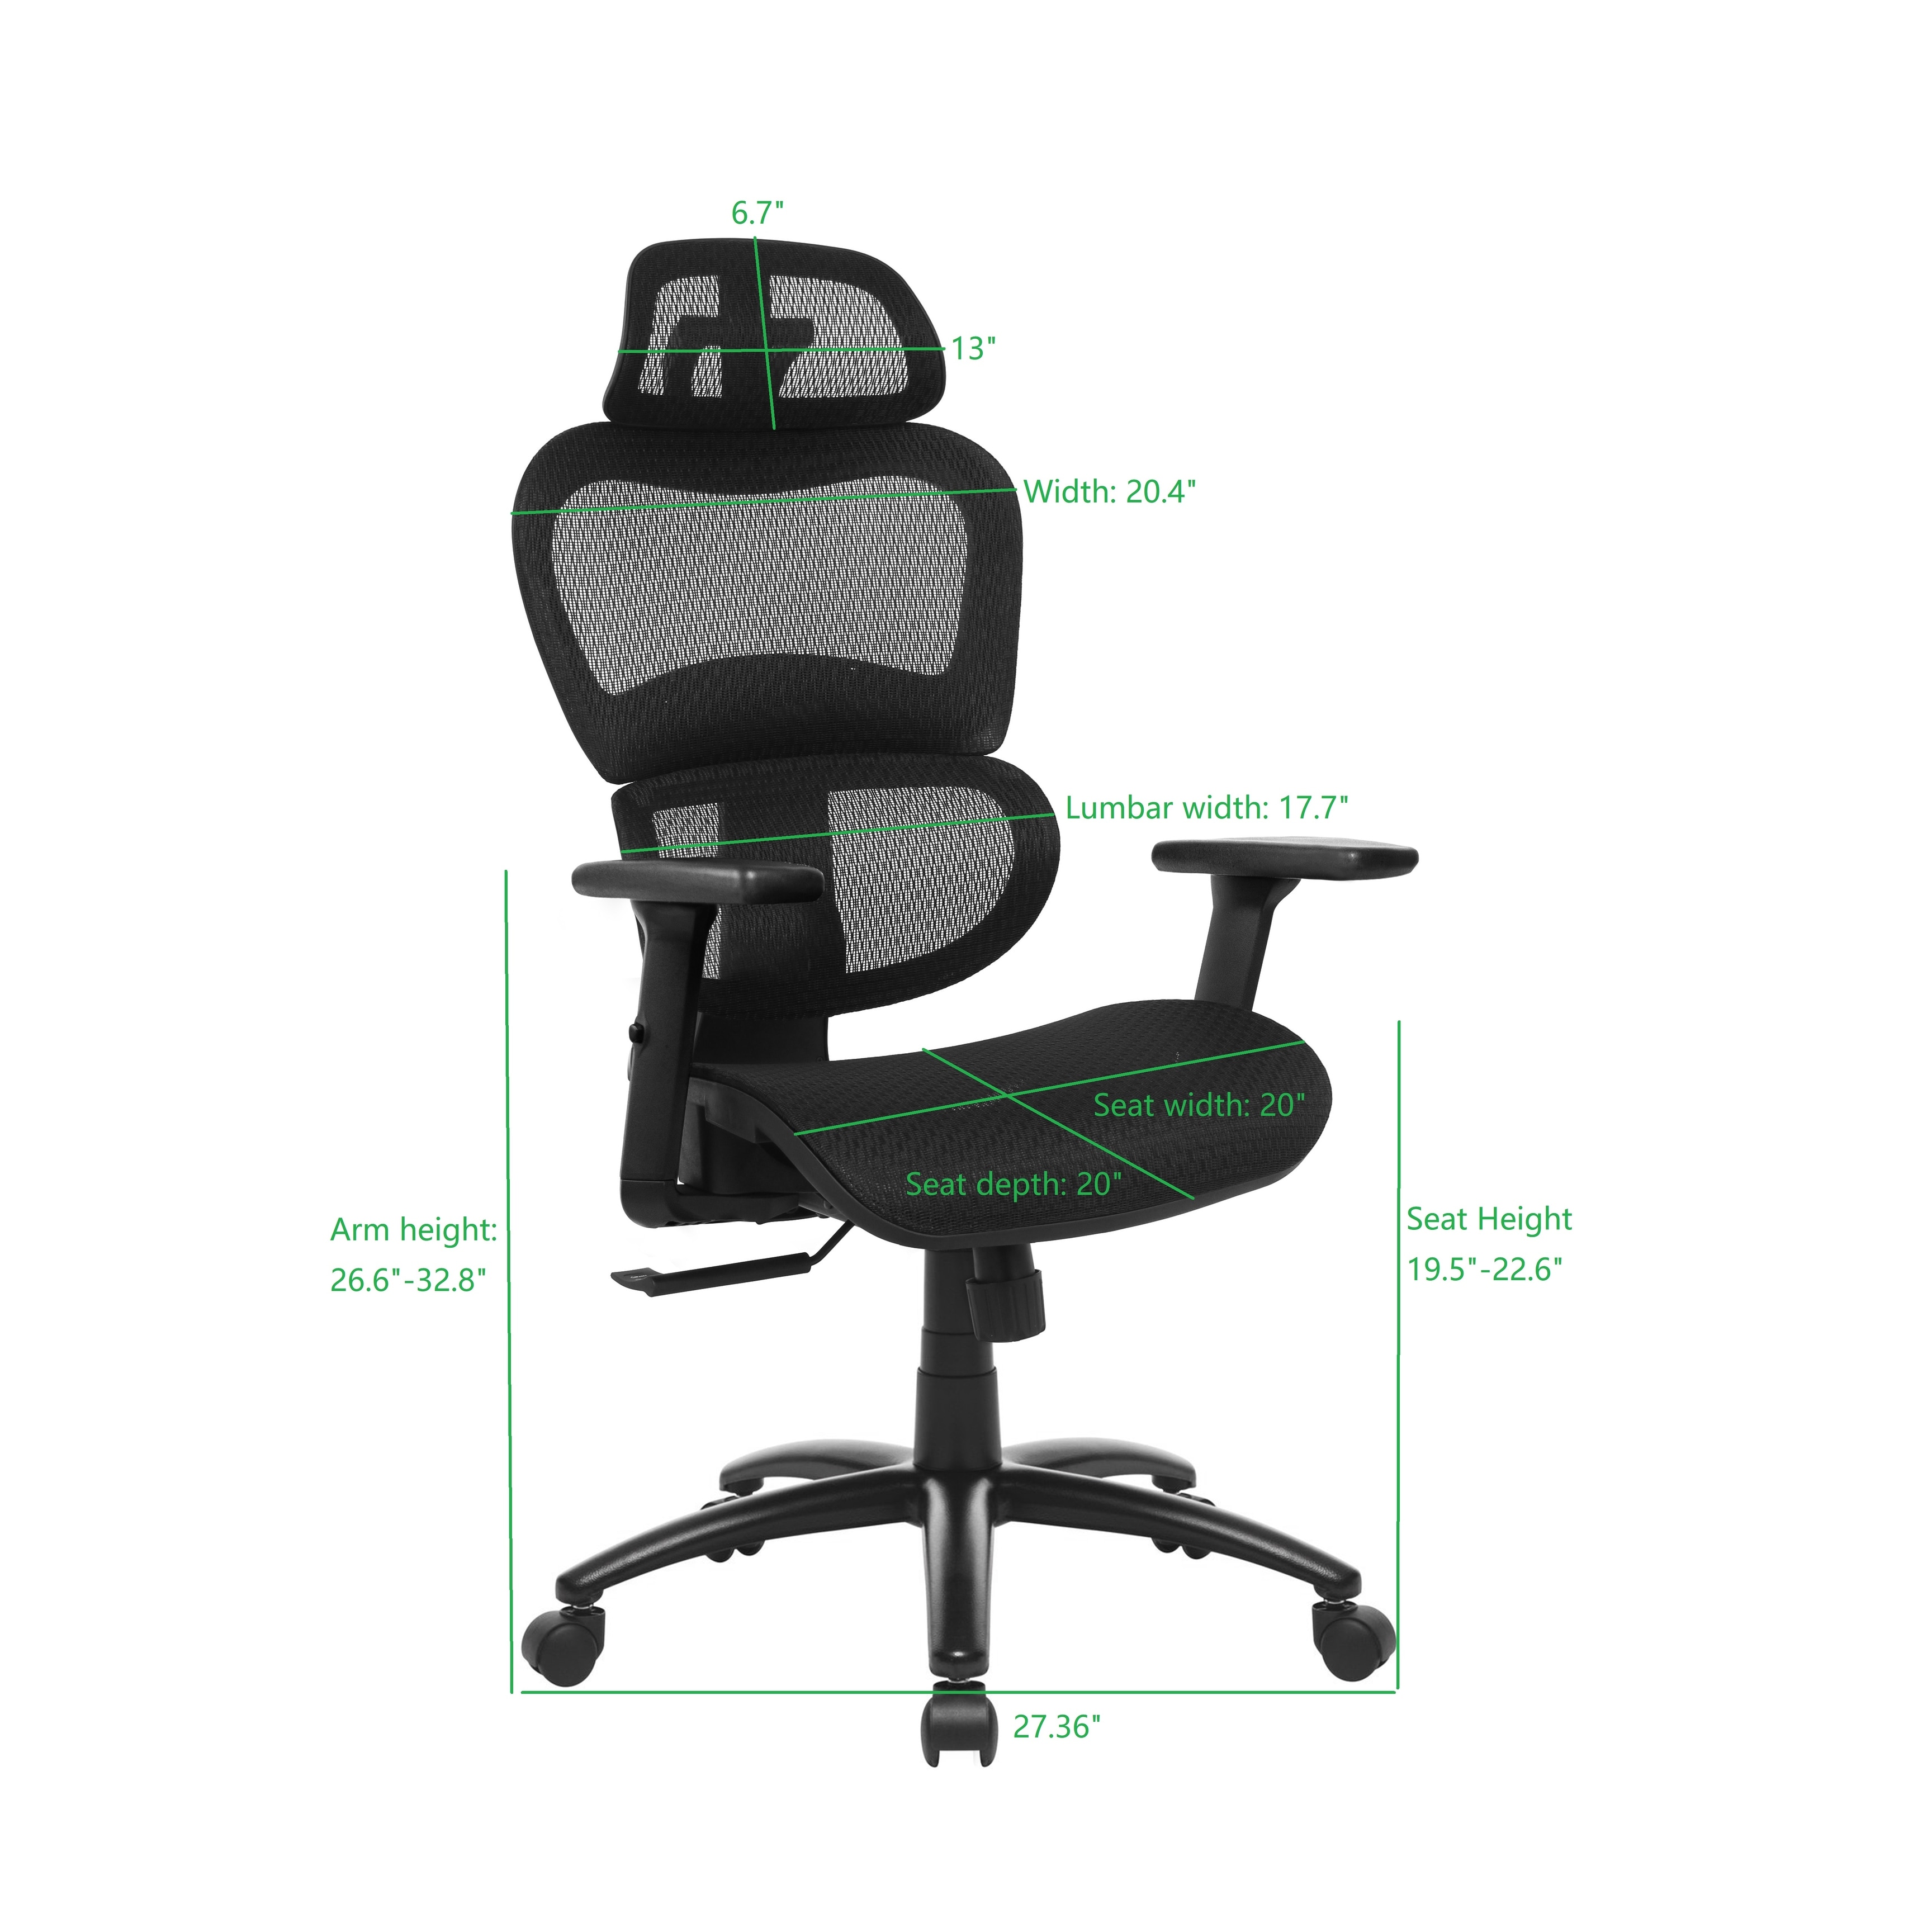 https://ak1.ostkcdn.com/images/products/is/images/direct/3ae482255d6076b0989642e984f2817d76b434ea/Ergonomic-mesh-chair-with-3D-arms-in-RED-color.jpg